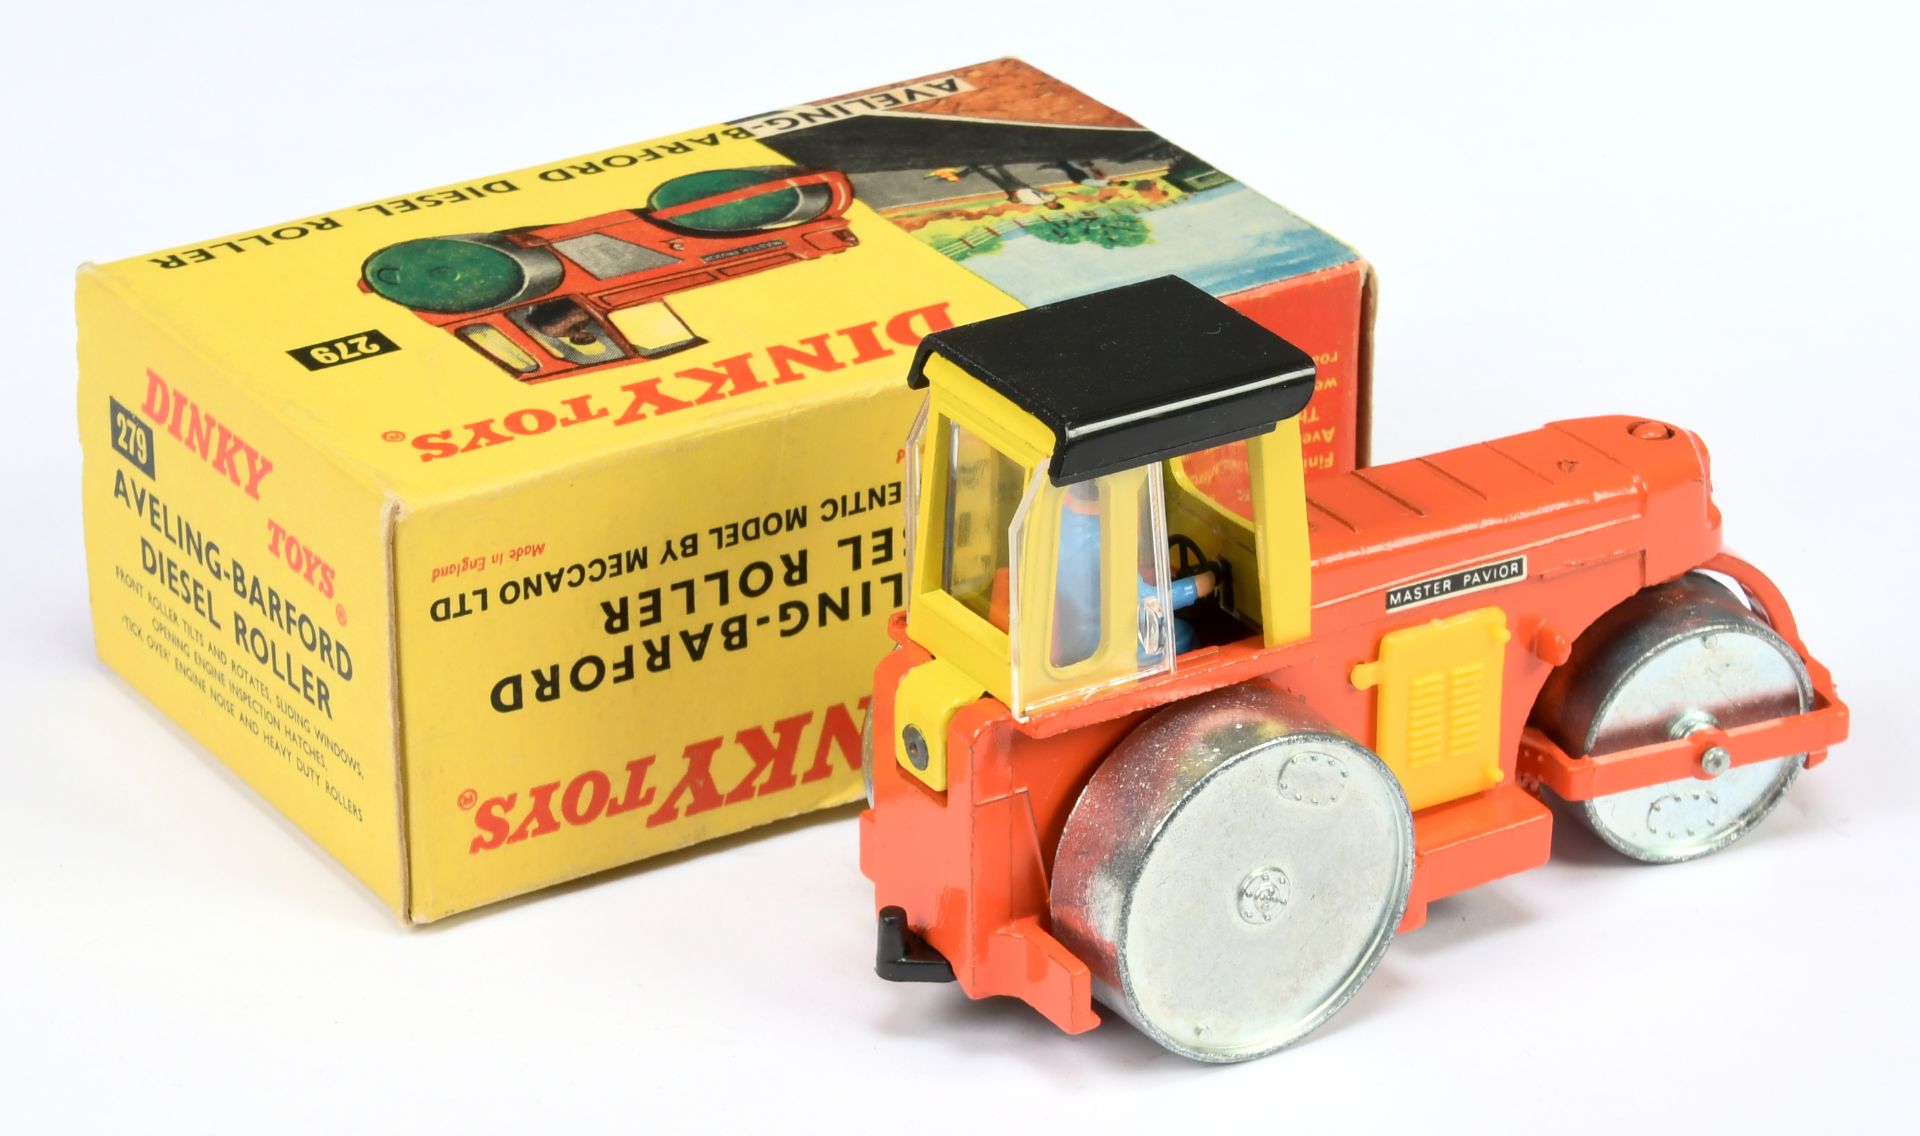 Dinky Toys 279 Aveling Barford Diesel Roller - orange body yellow cab with black roof, yellow pla... - Image 2 of 2